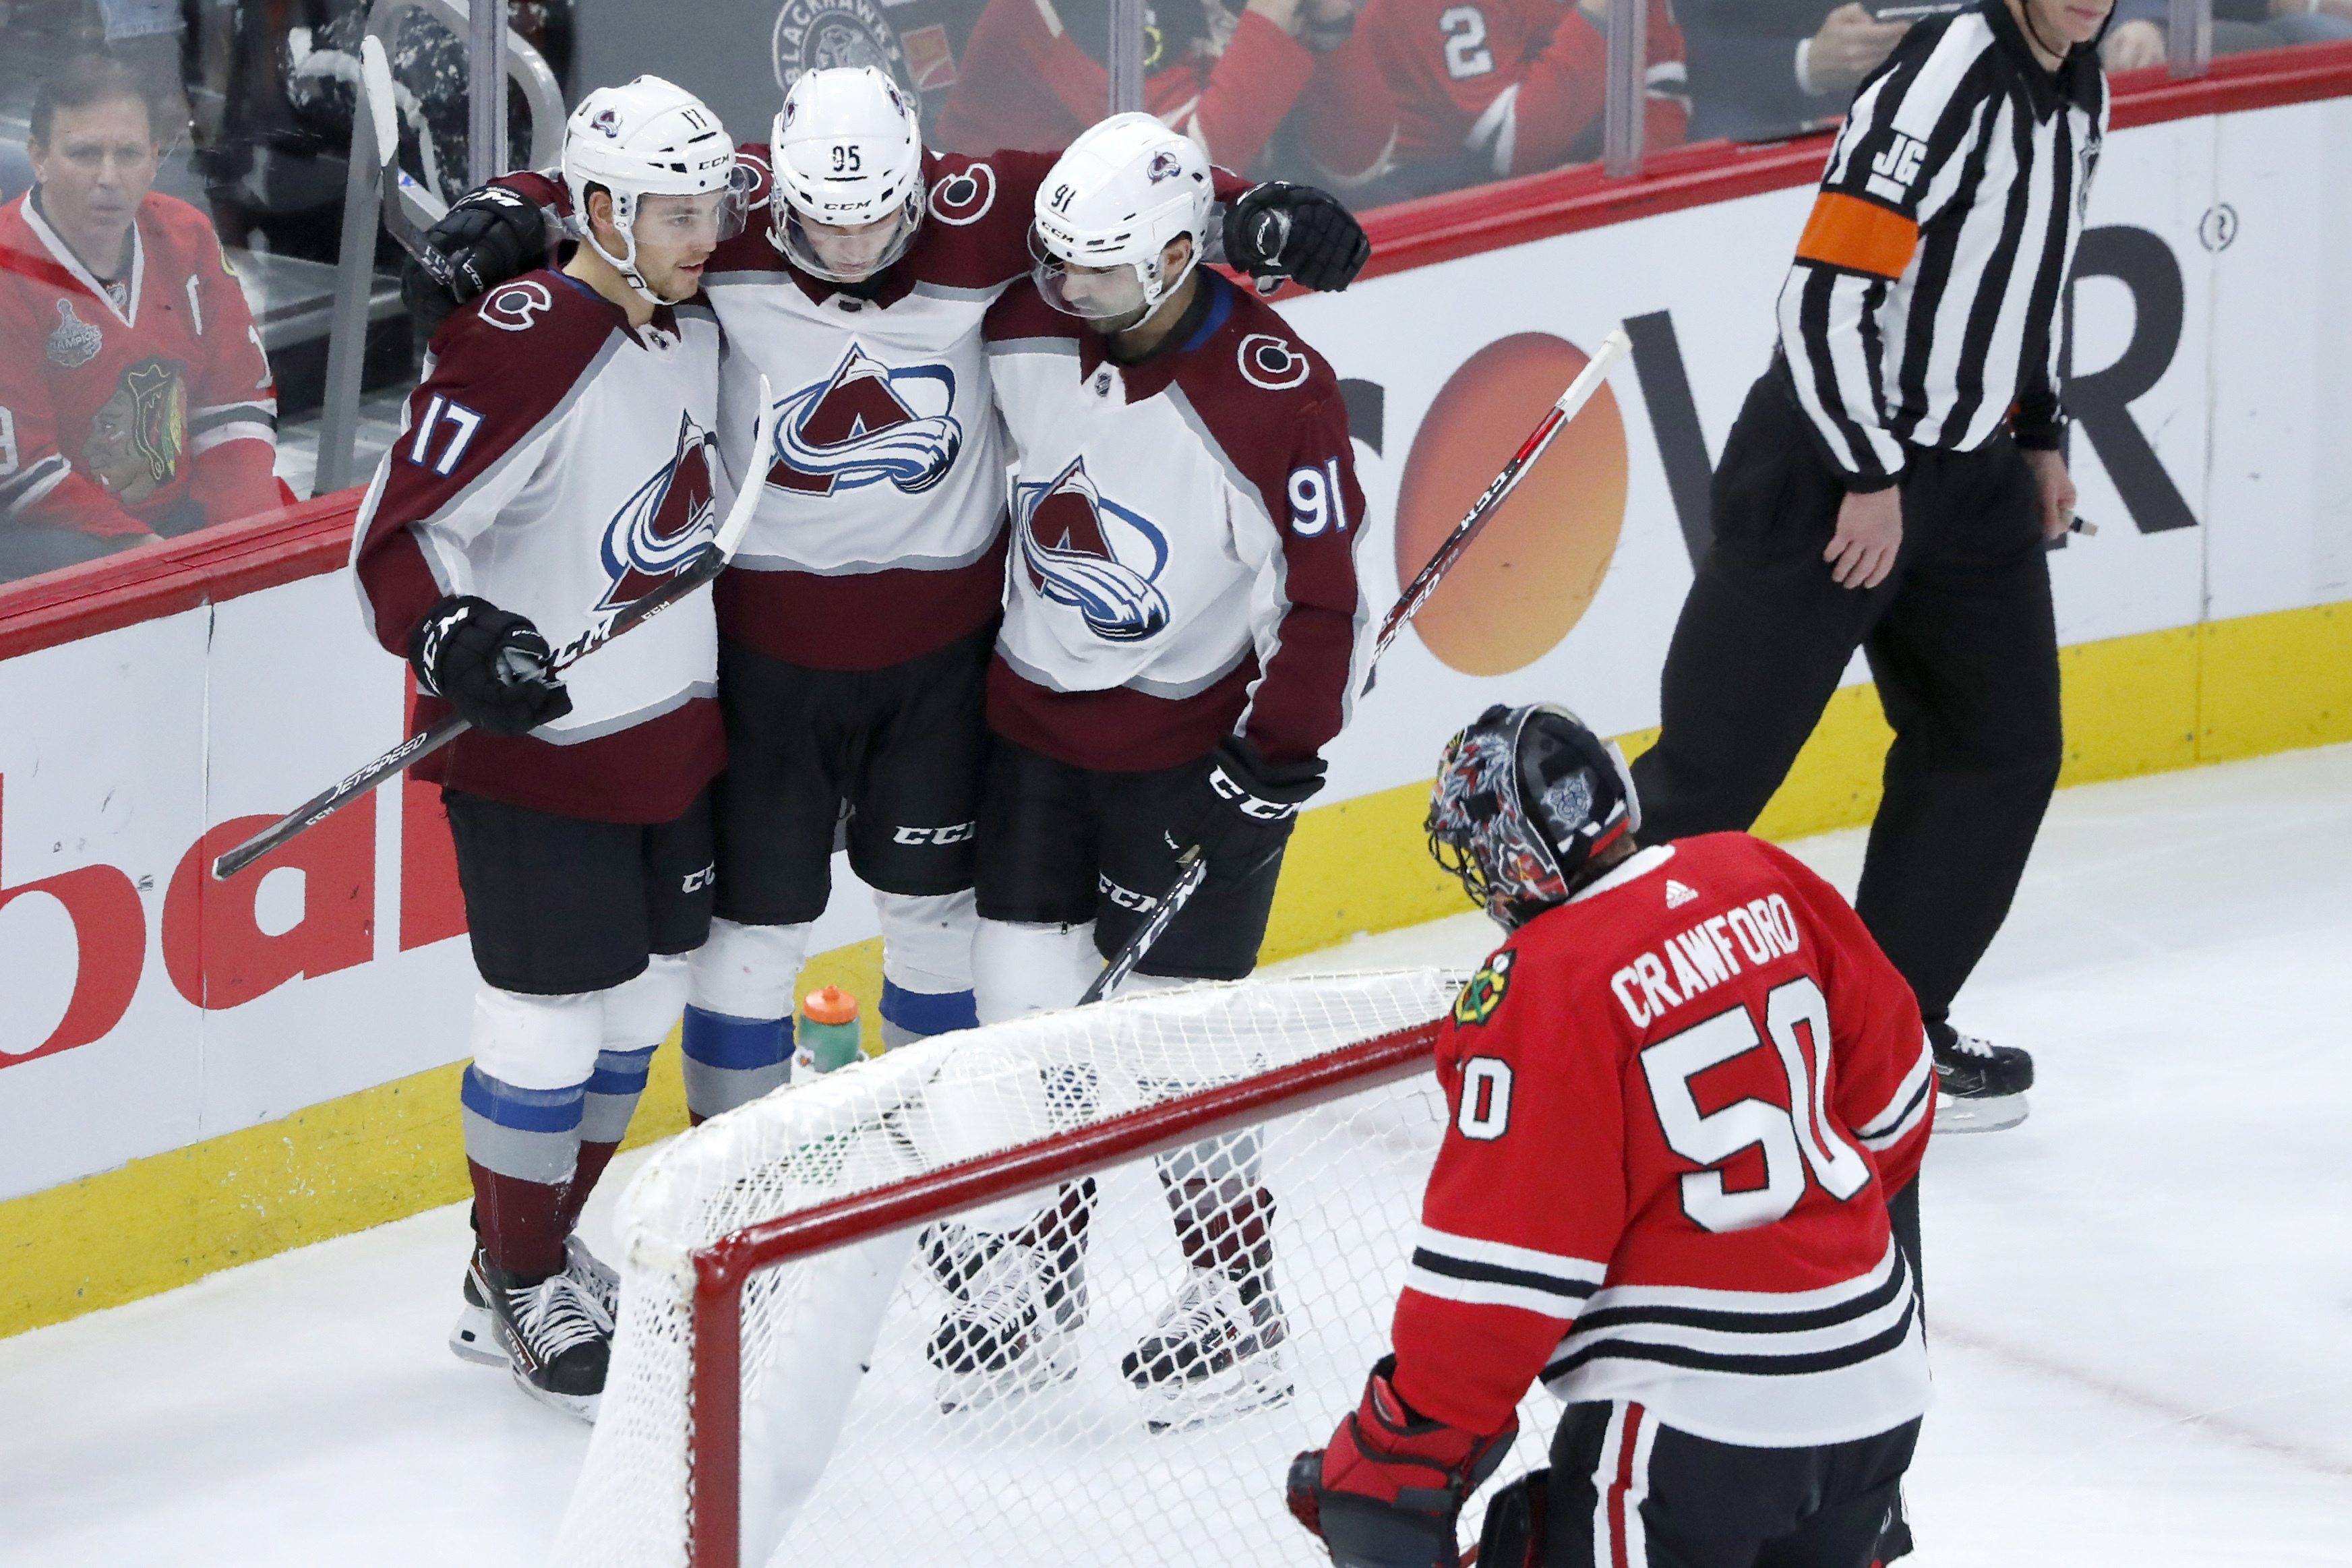 Avs get back on track with 4-1 win over Blackhawks